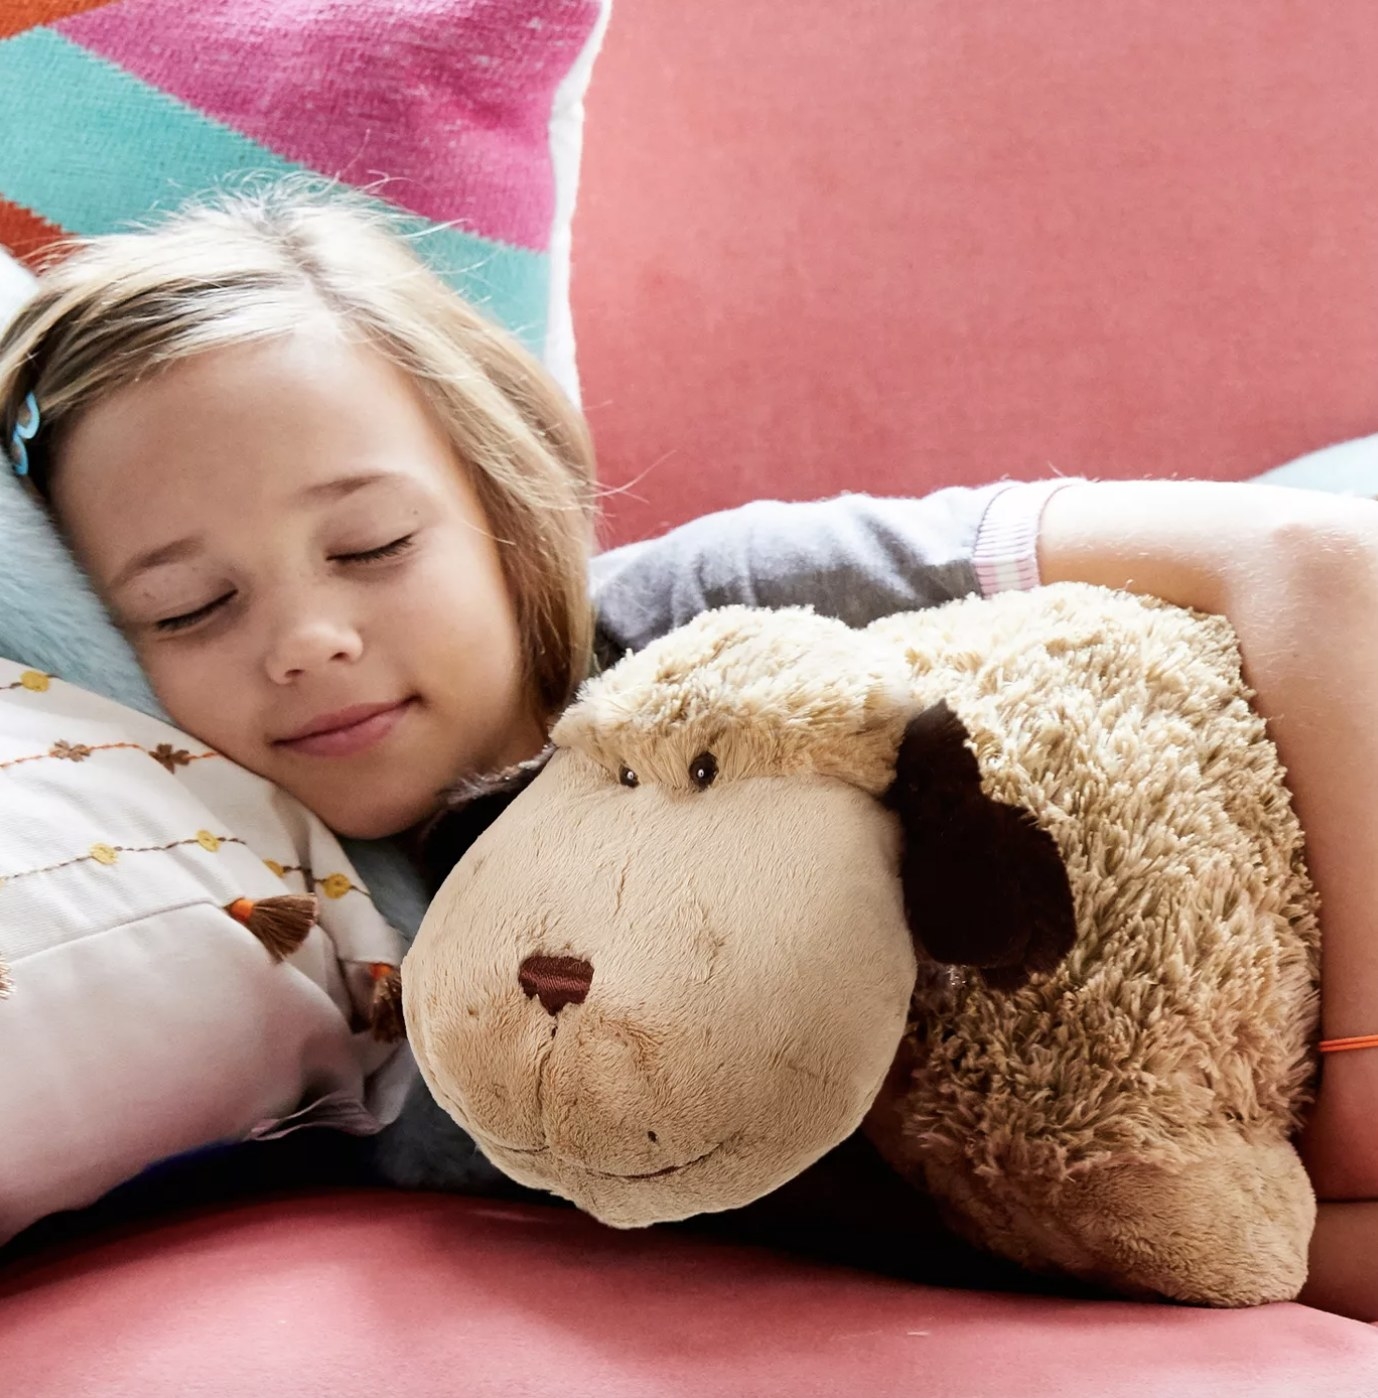 A child sleep contently next to a brown puppy pillow